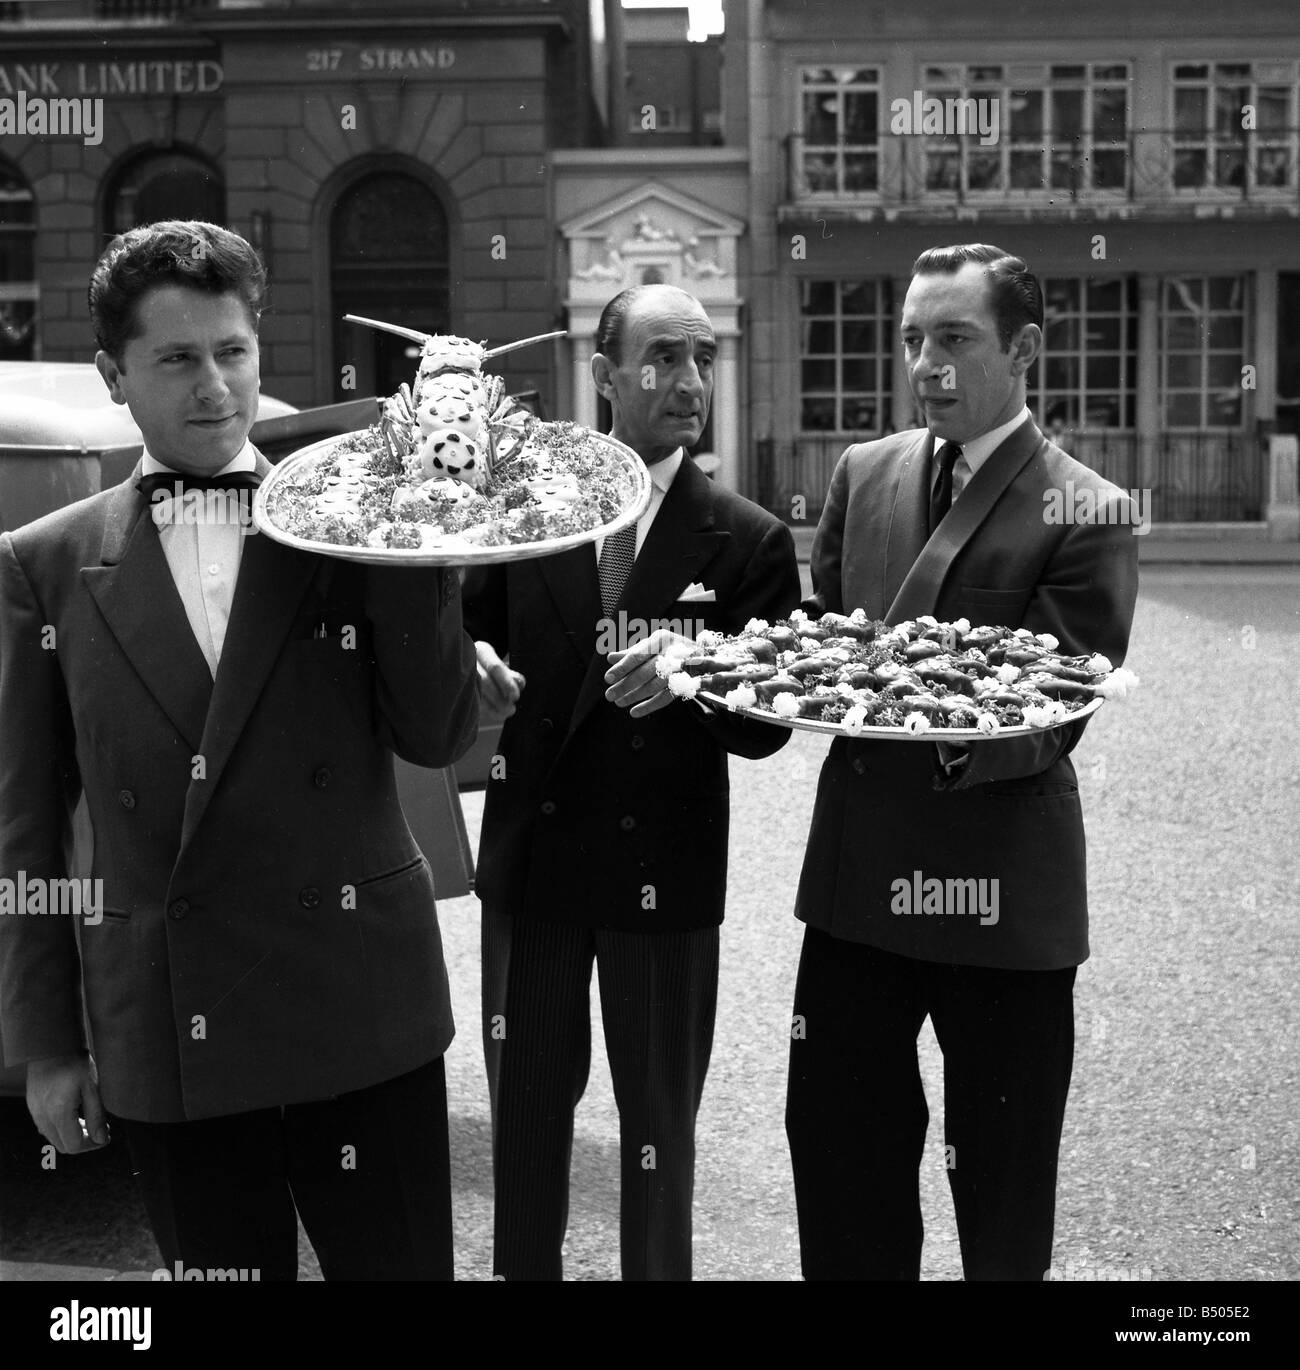 Restaurant men from the Caprice on their way to the Law Courts to serve lunch to millionaire Nubar Gulbenkian. The 66 year old millionaire is embroilled in a lawsuit against the BBC over the ' Face to Face' TV programme. ;July 1962;Q5948 Stock Photo